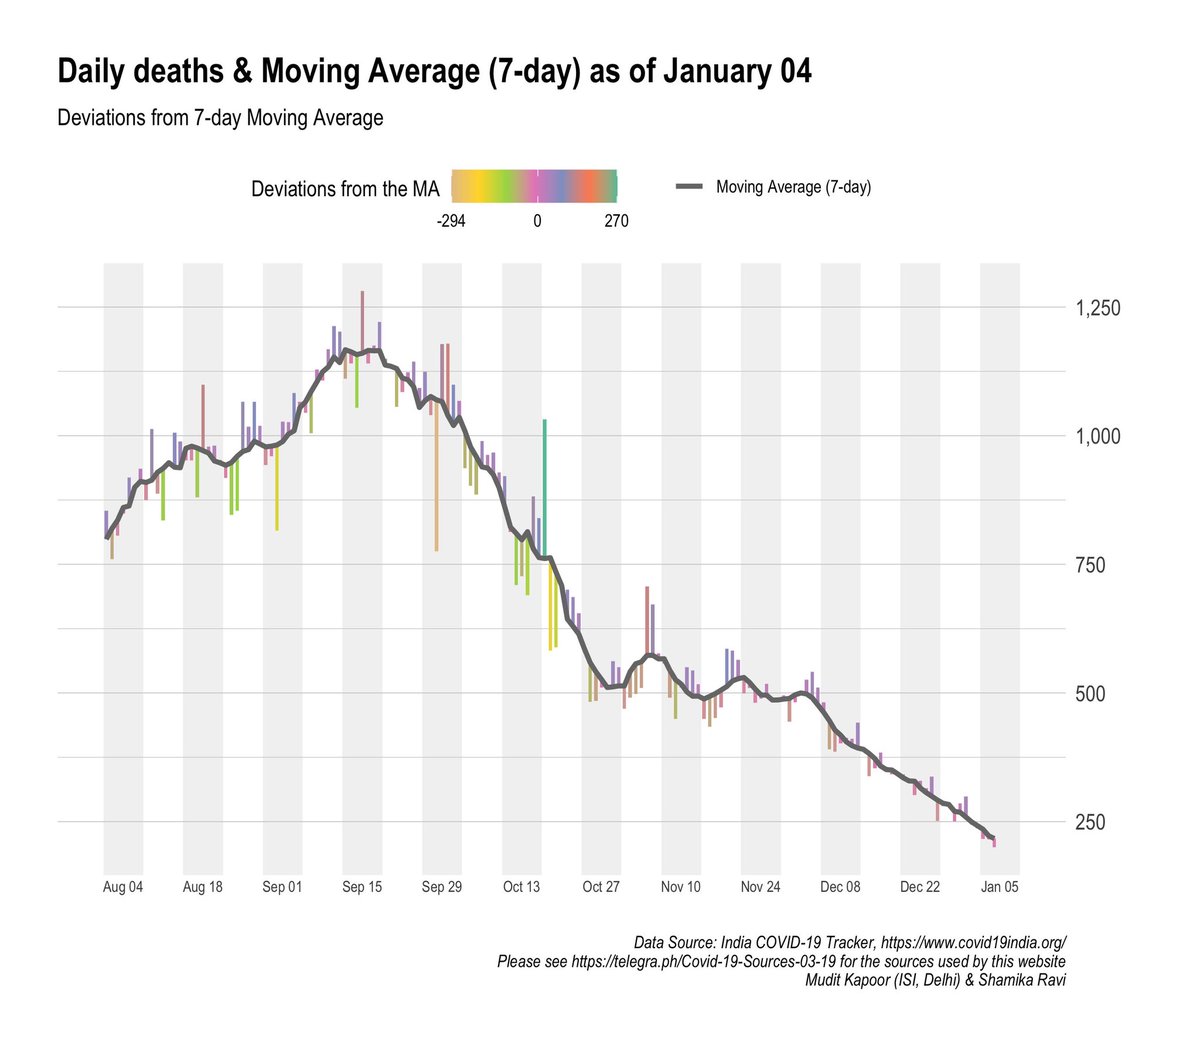 Daily deaths continue to fall steadily & now < 250